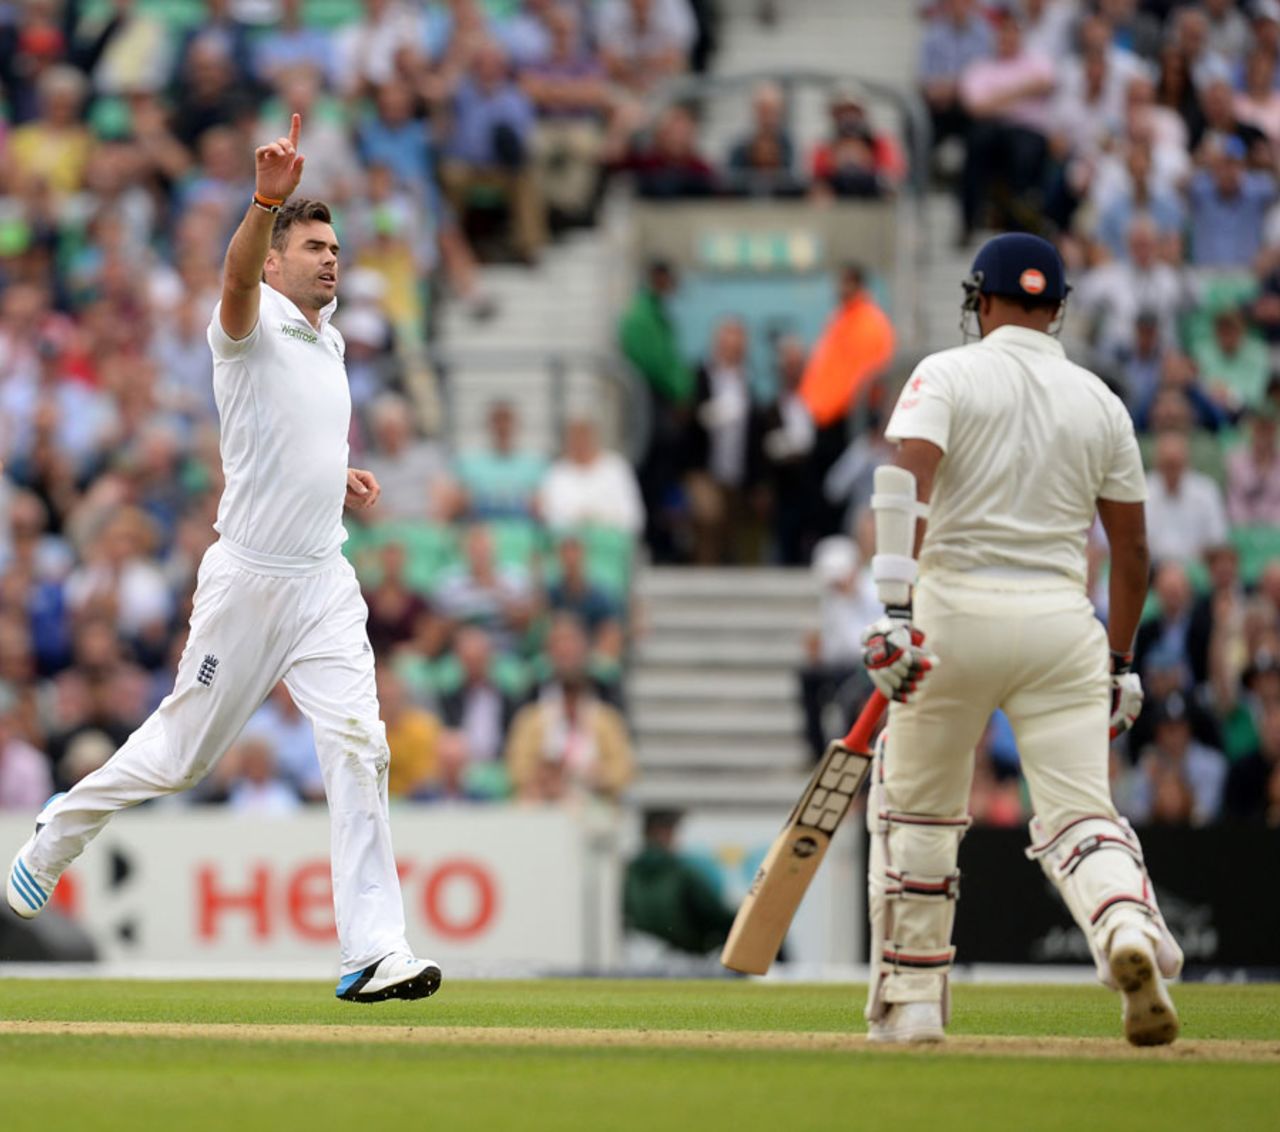 James Anderson tormeted Stuart Binny before dismissing him, England v India, 5th Investec Test, The Oval, 1st day, August 15, 2014